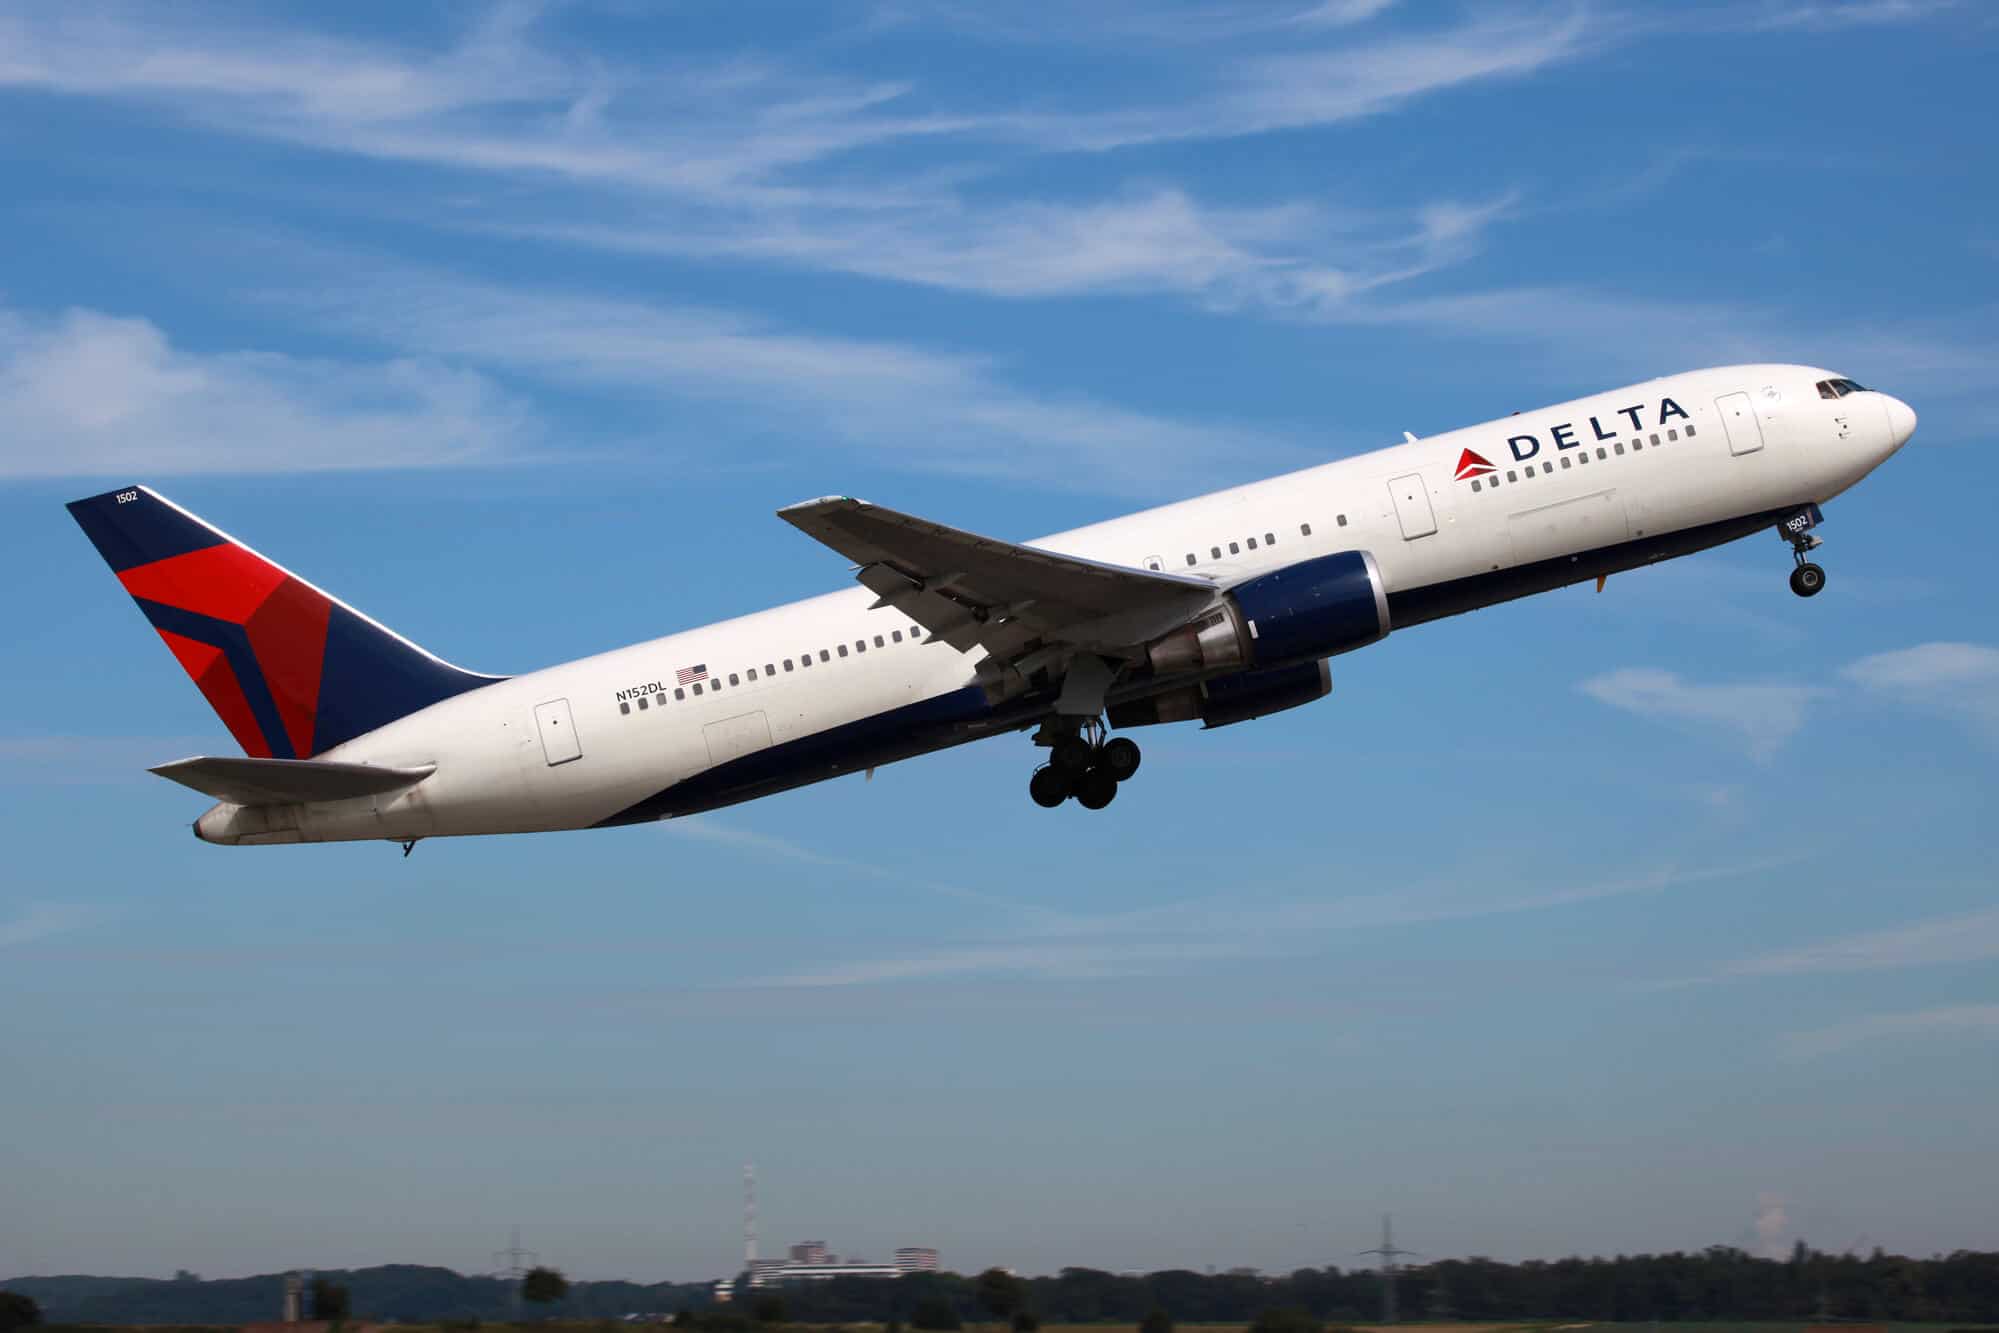 Guide to Working at Delta Air Lines